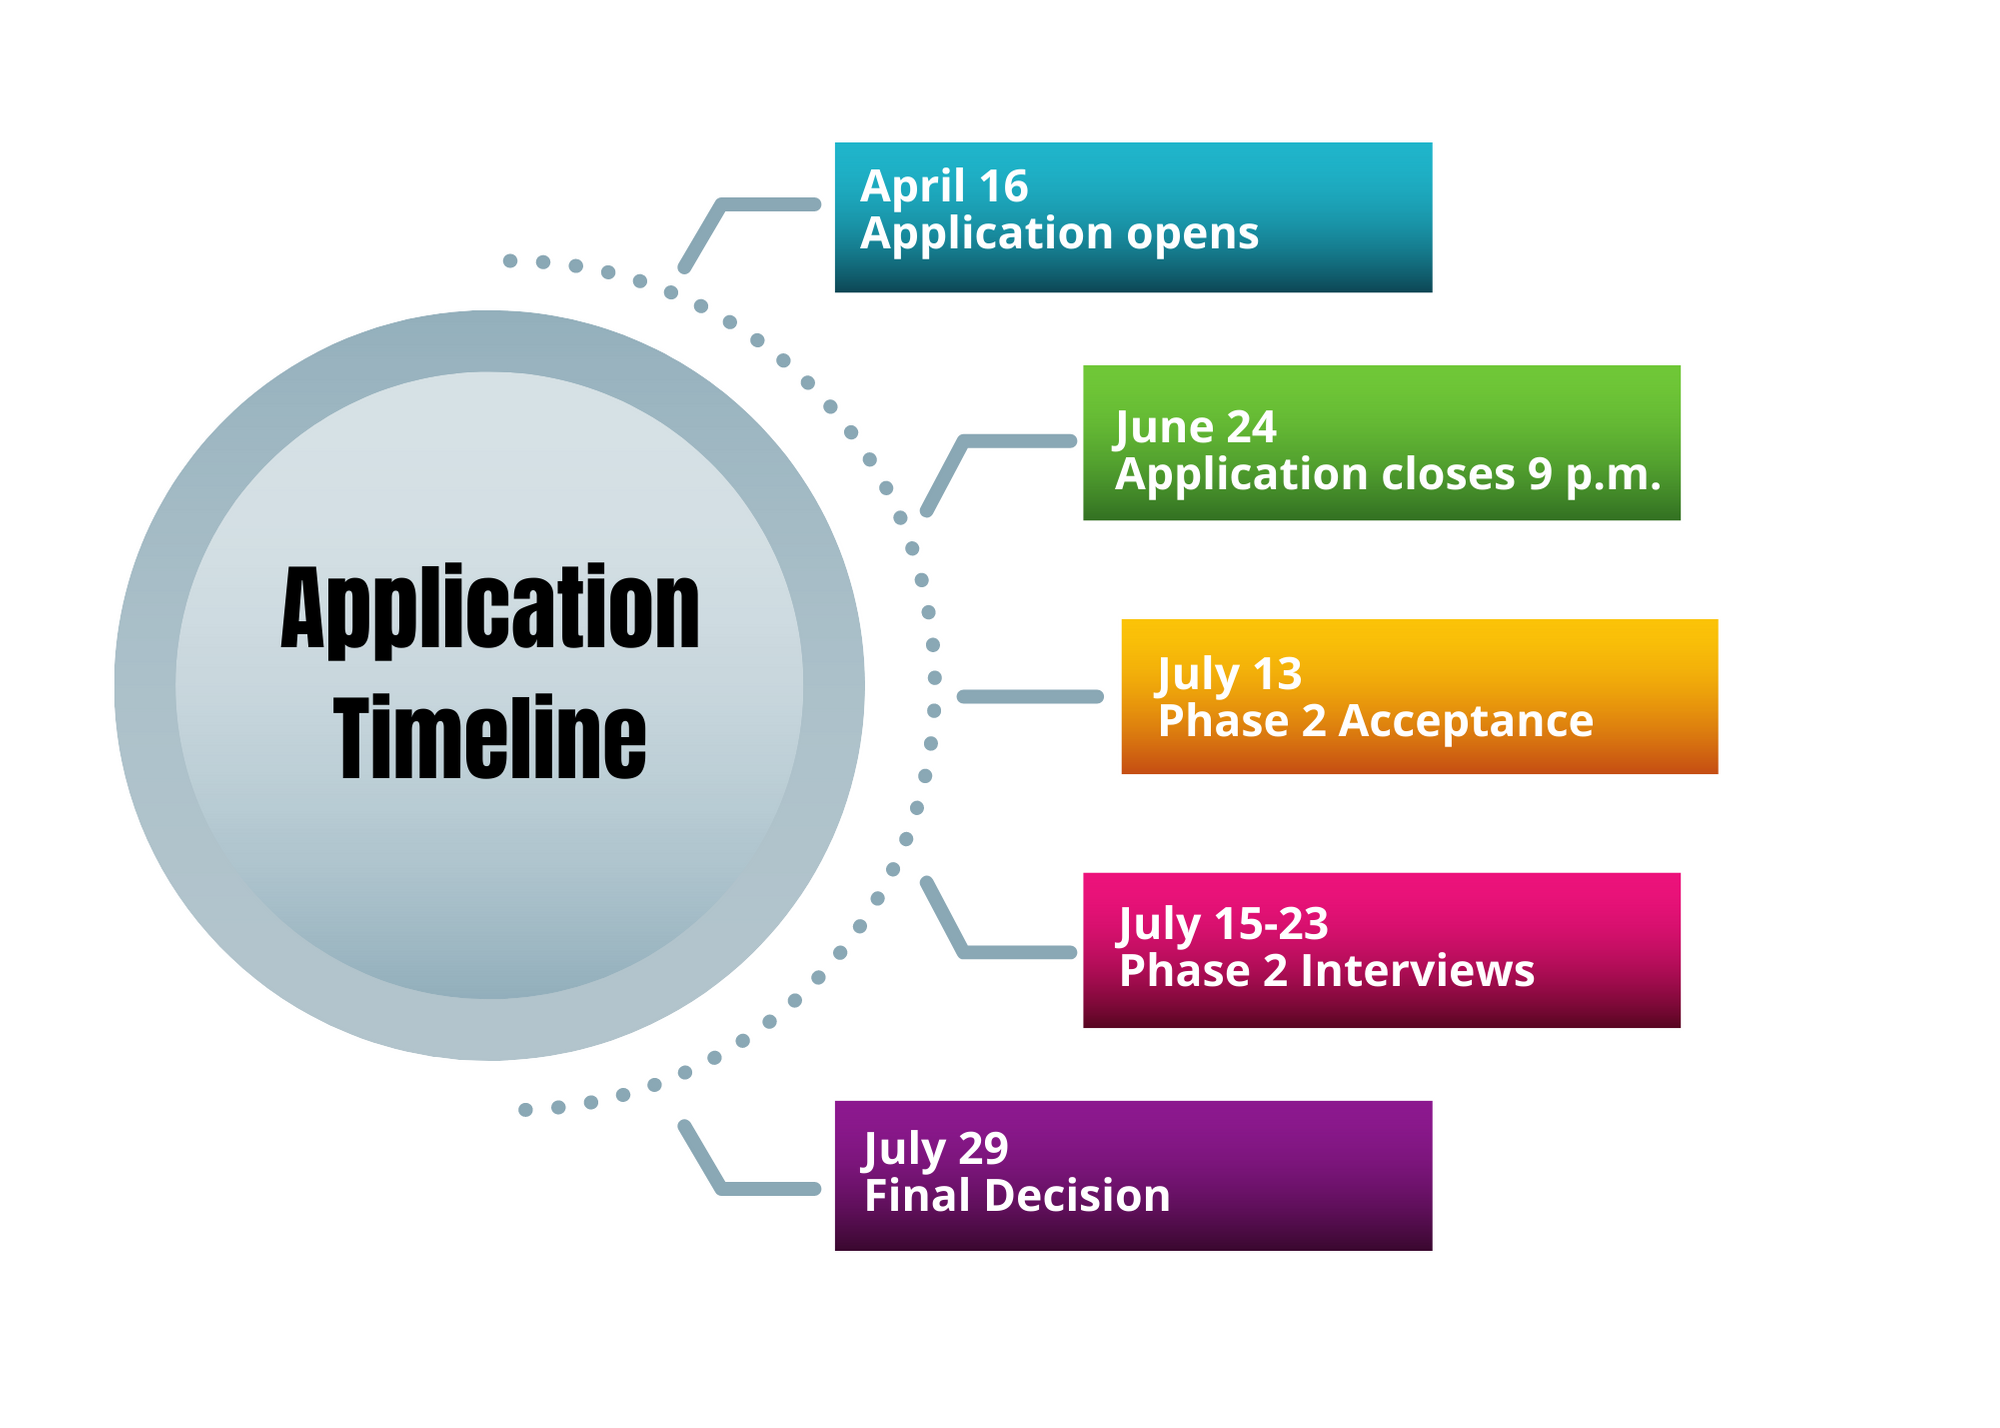 Application timeline: April 16 application opens, May 31 Application closes 9 PM, June 28 Phase 2 acceptance, June 29 - July 19 Phase 2 interviews, August Final Decision.